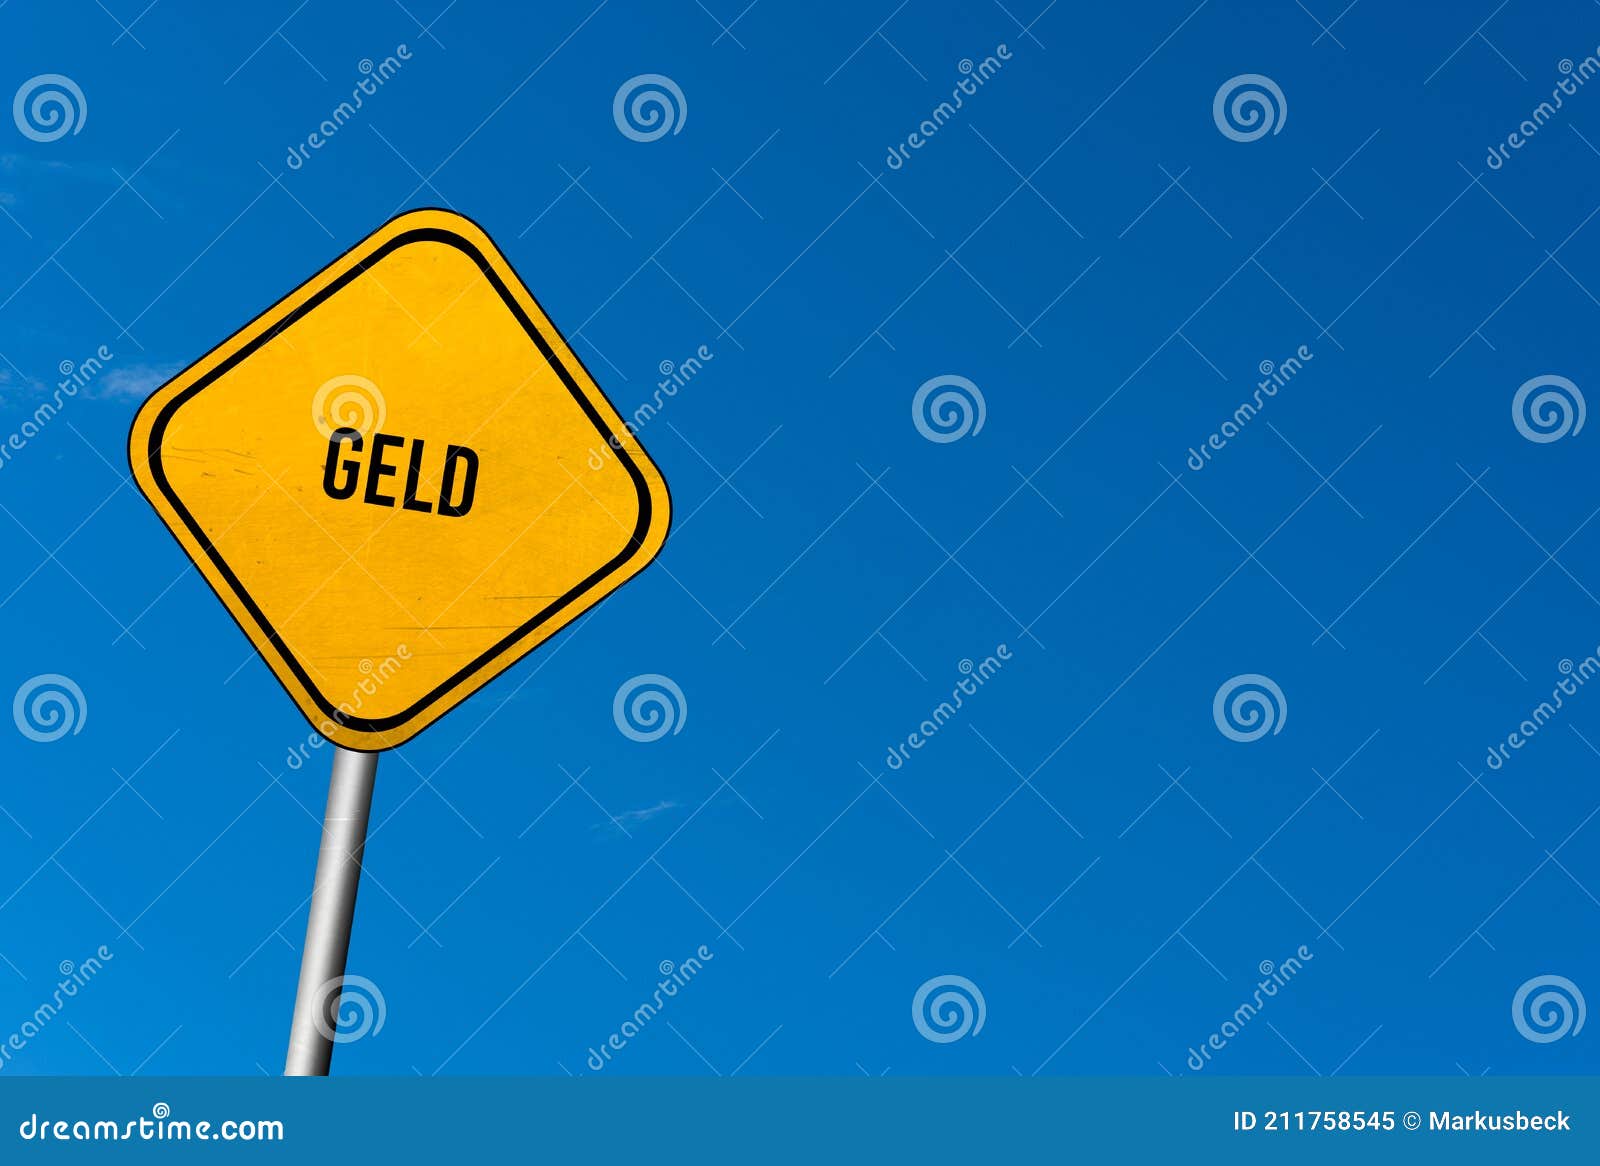 geld - yellow sign with blue sky